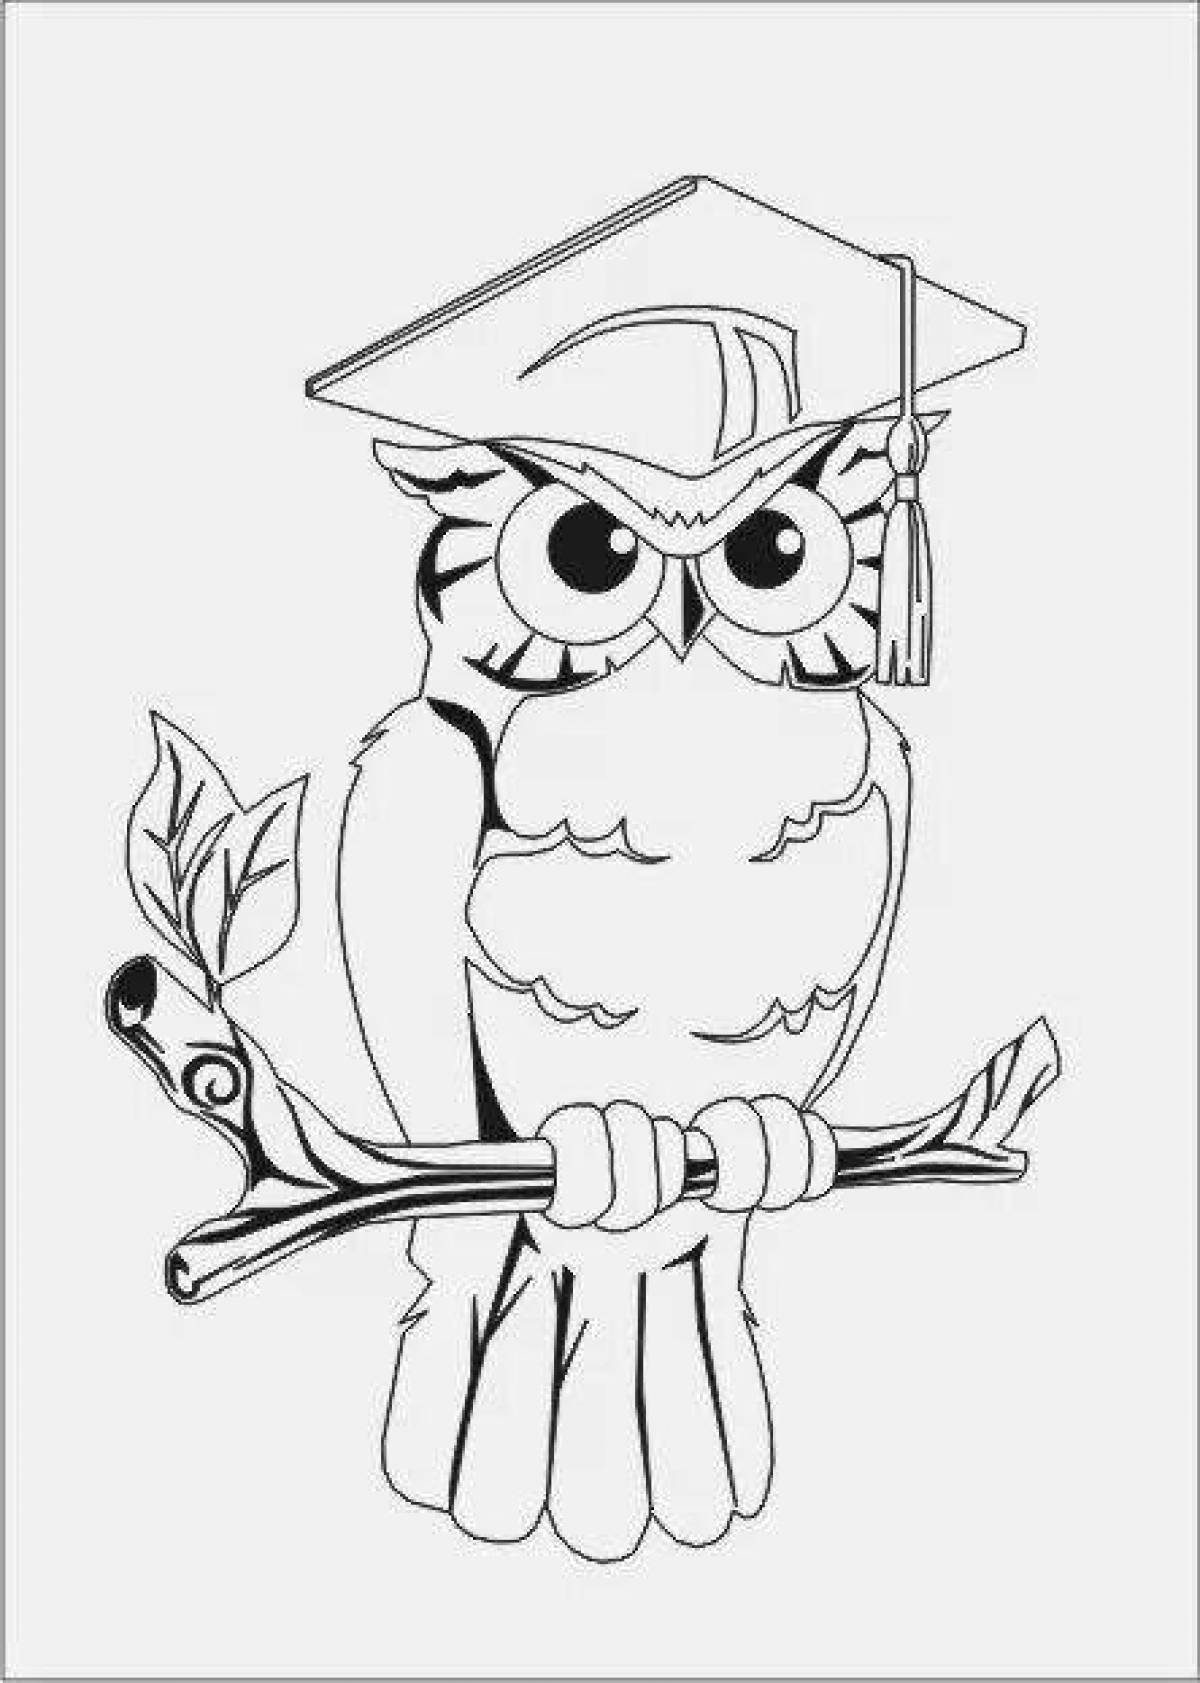 Coloring book wise owl with a candle